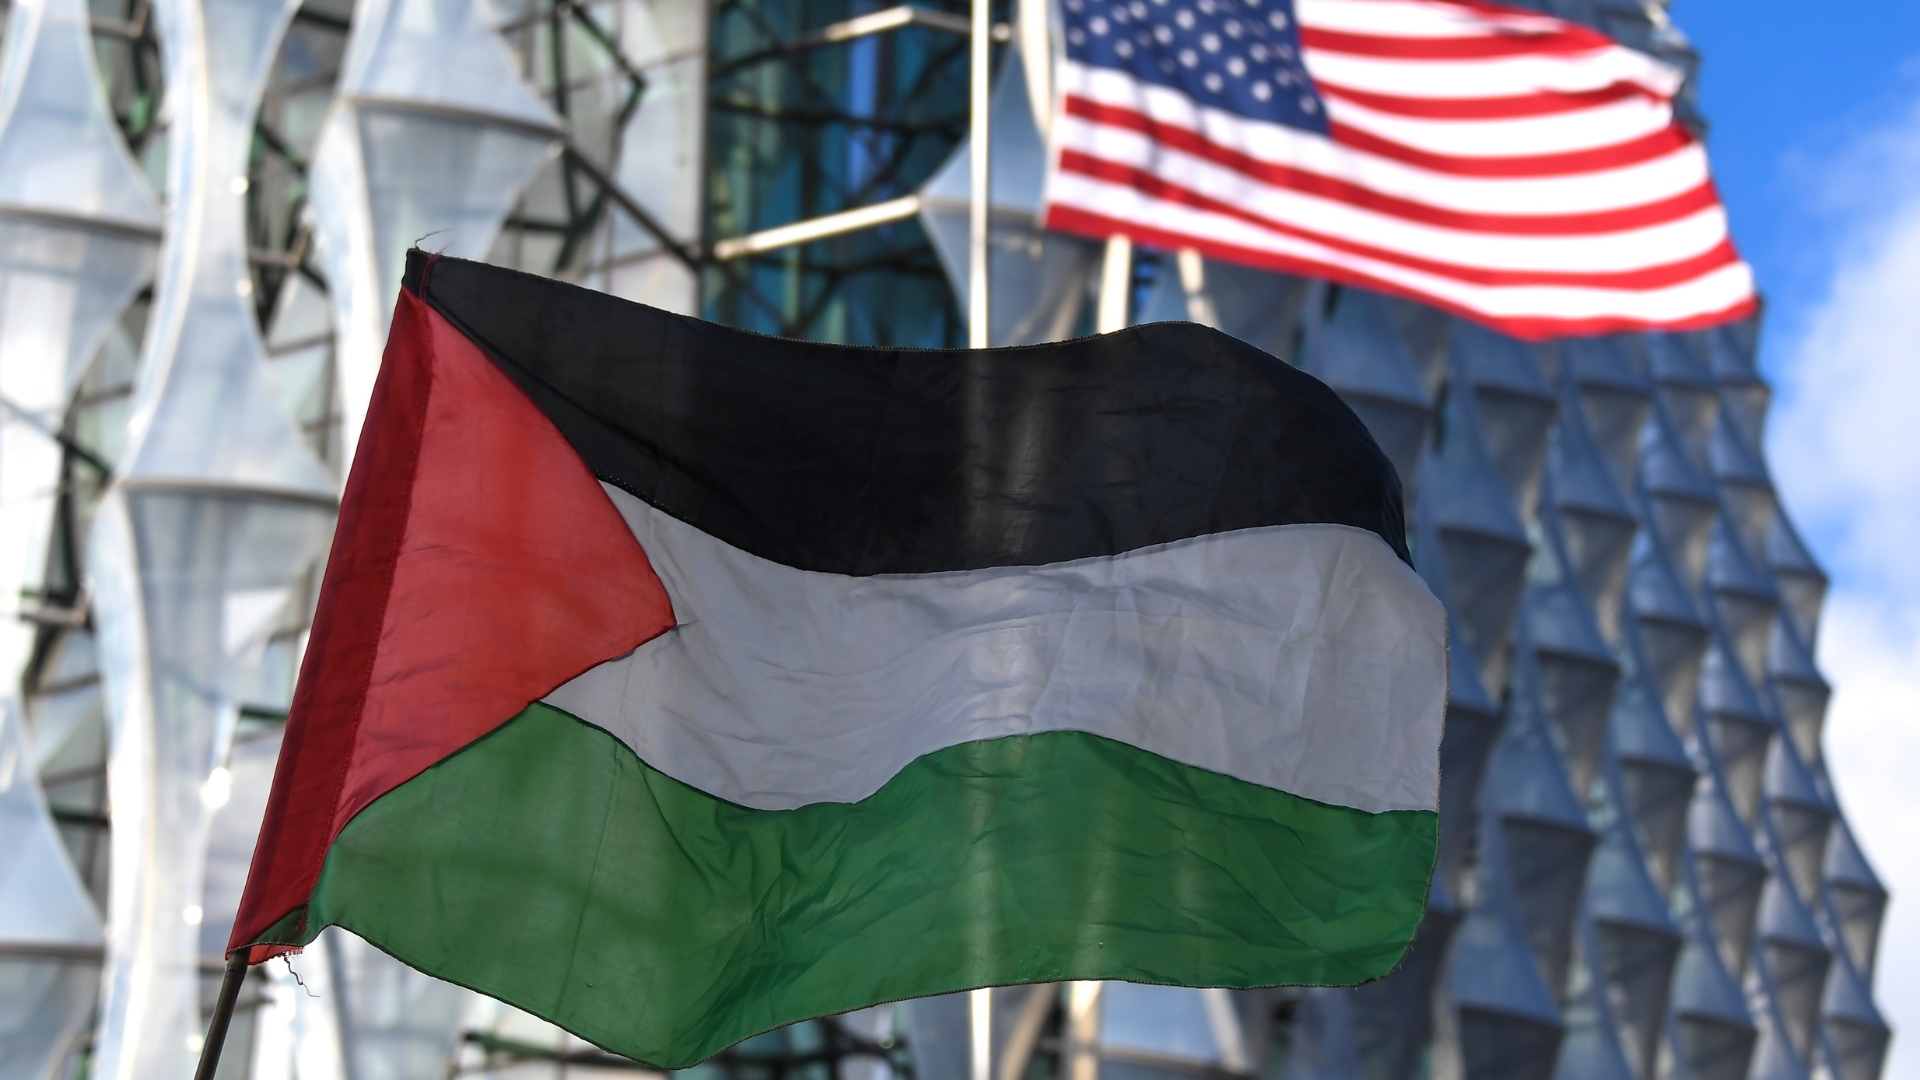 On Palestine, the gap between the US right and left is huge | Israel-Palestine conflict #Palestine #gap #left #huge #IsraelPalestine #conflict